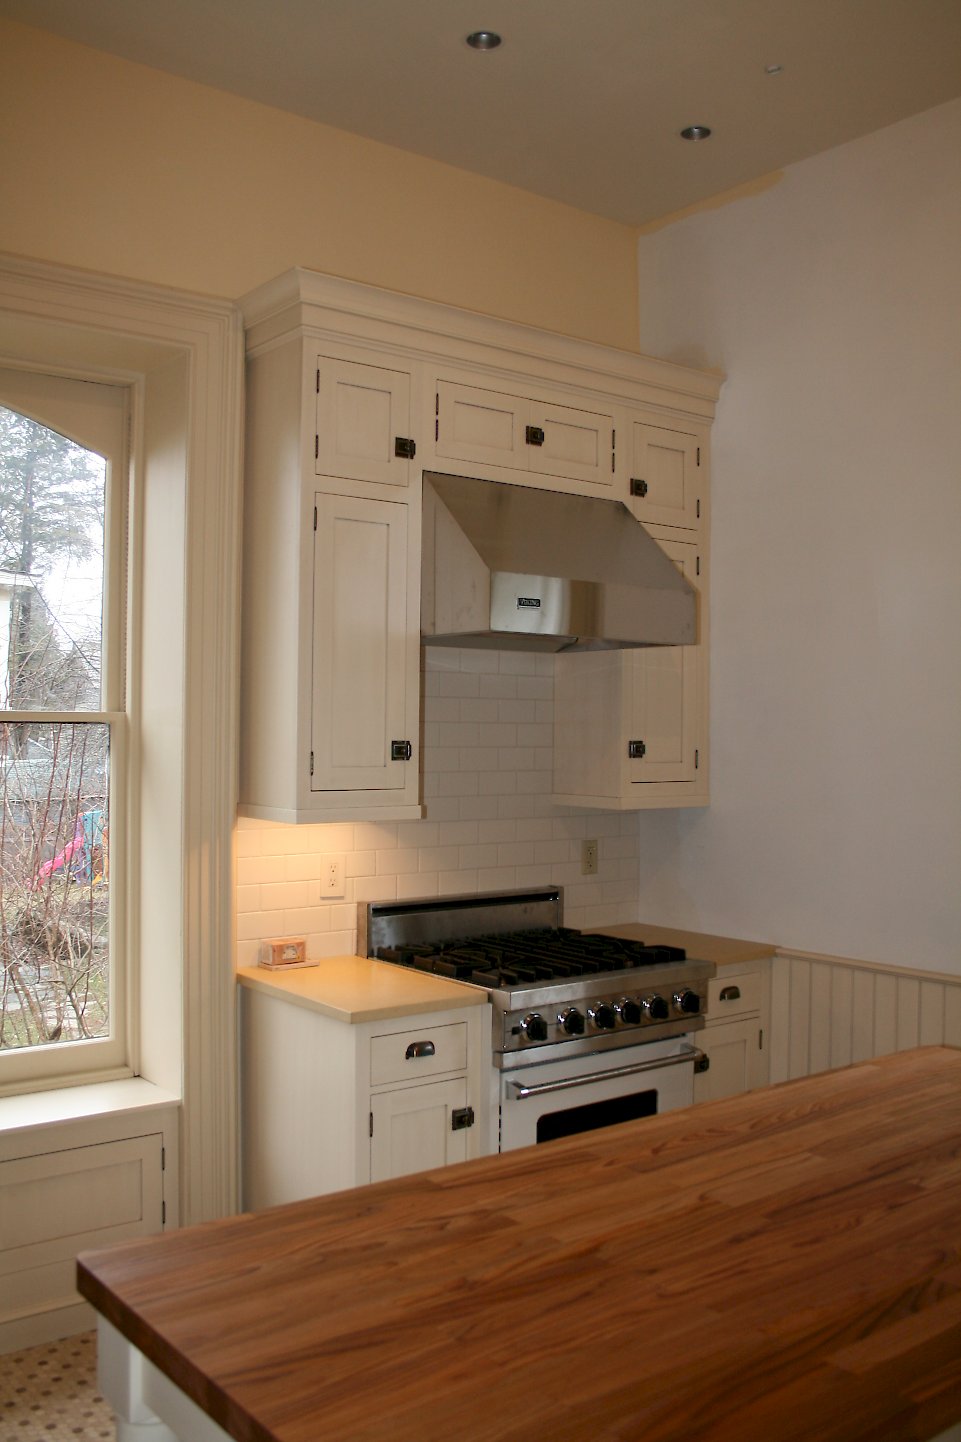 Stainless range and hood.